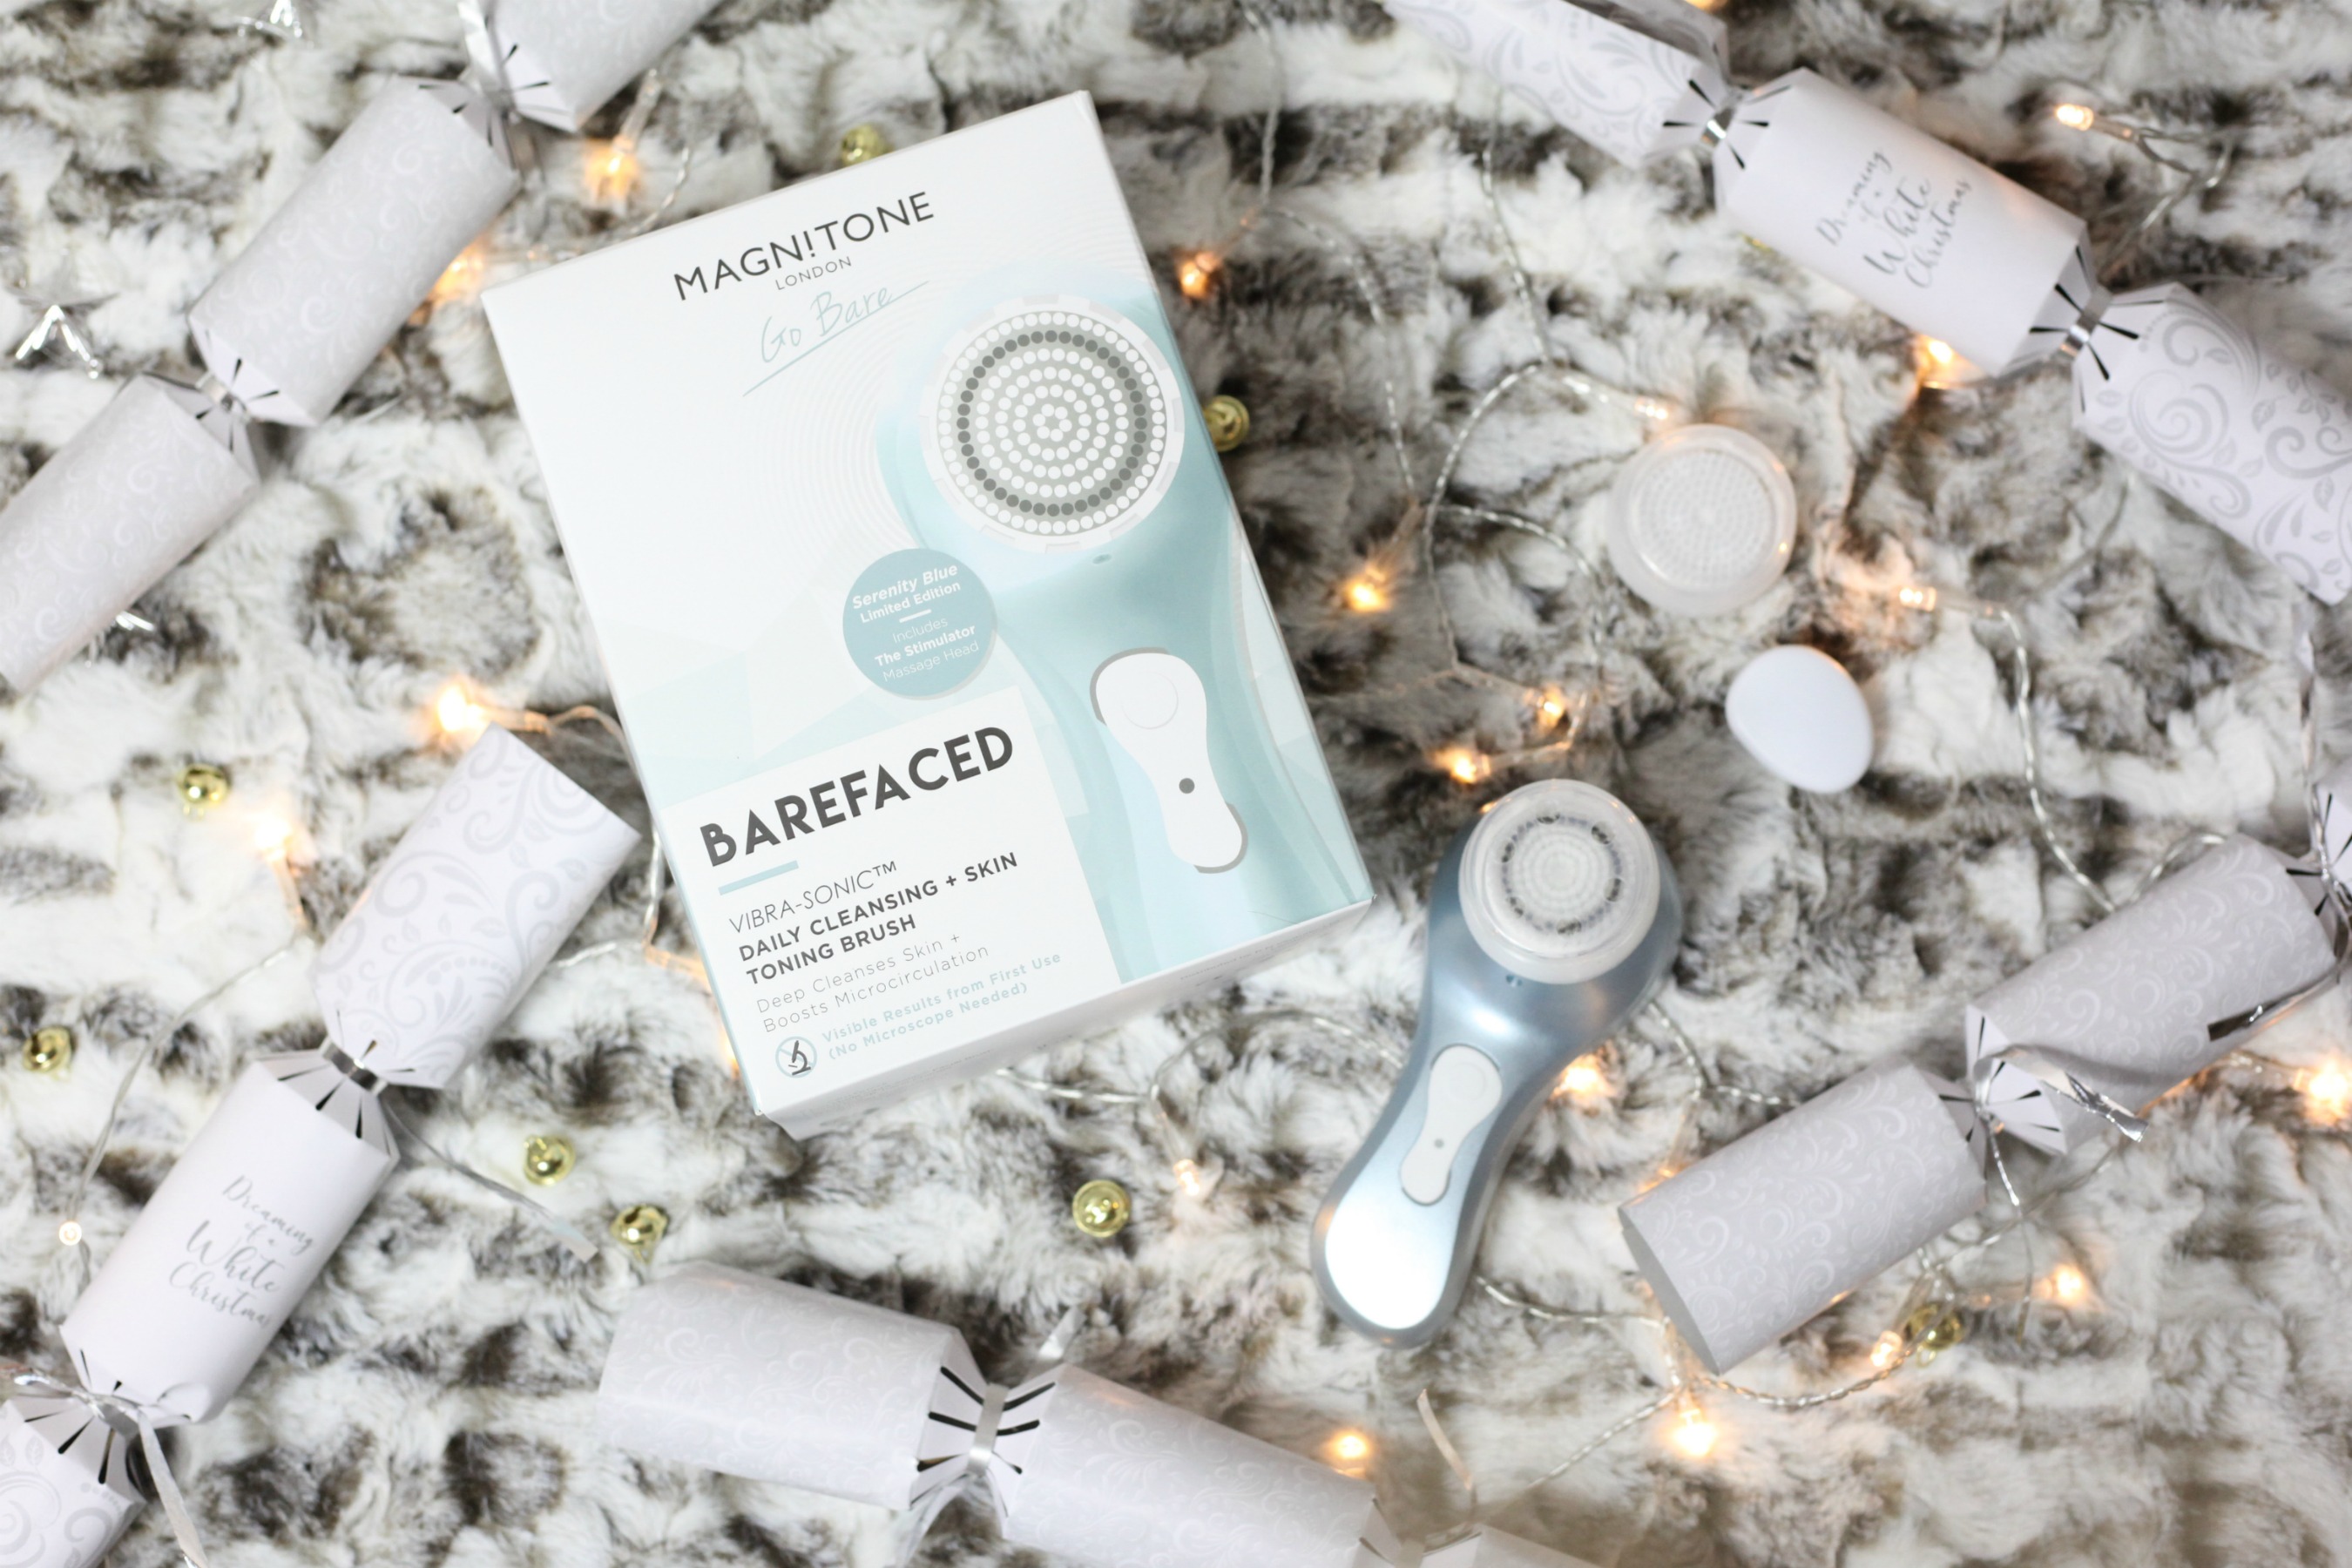 Luxurious Christmas gift ideas from Magnitone 